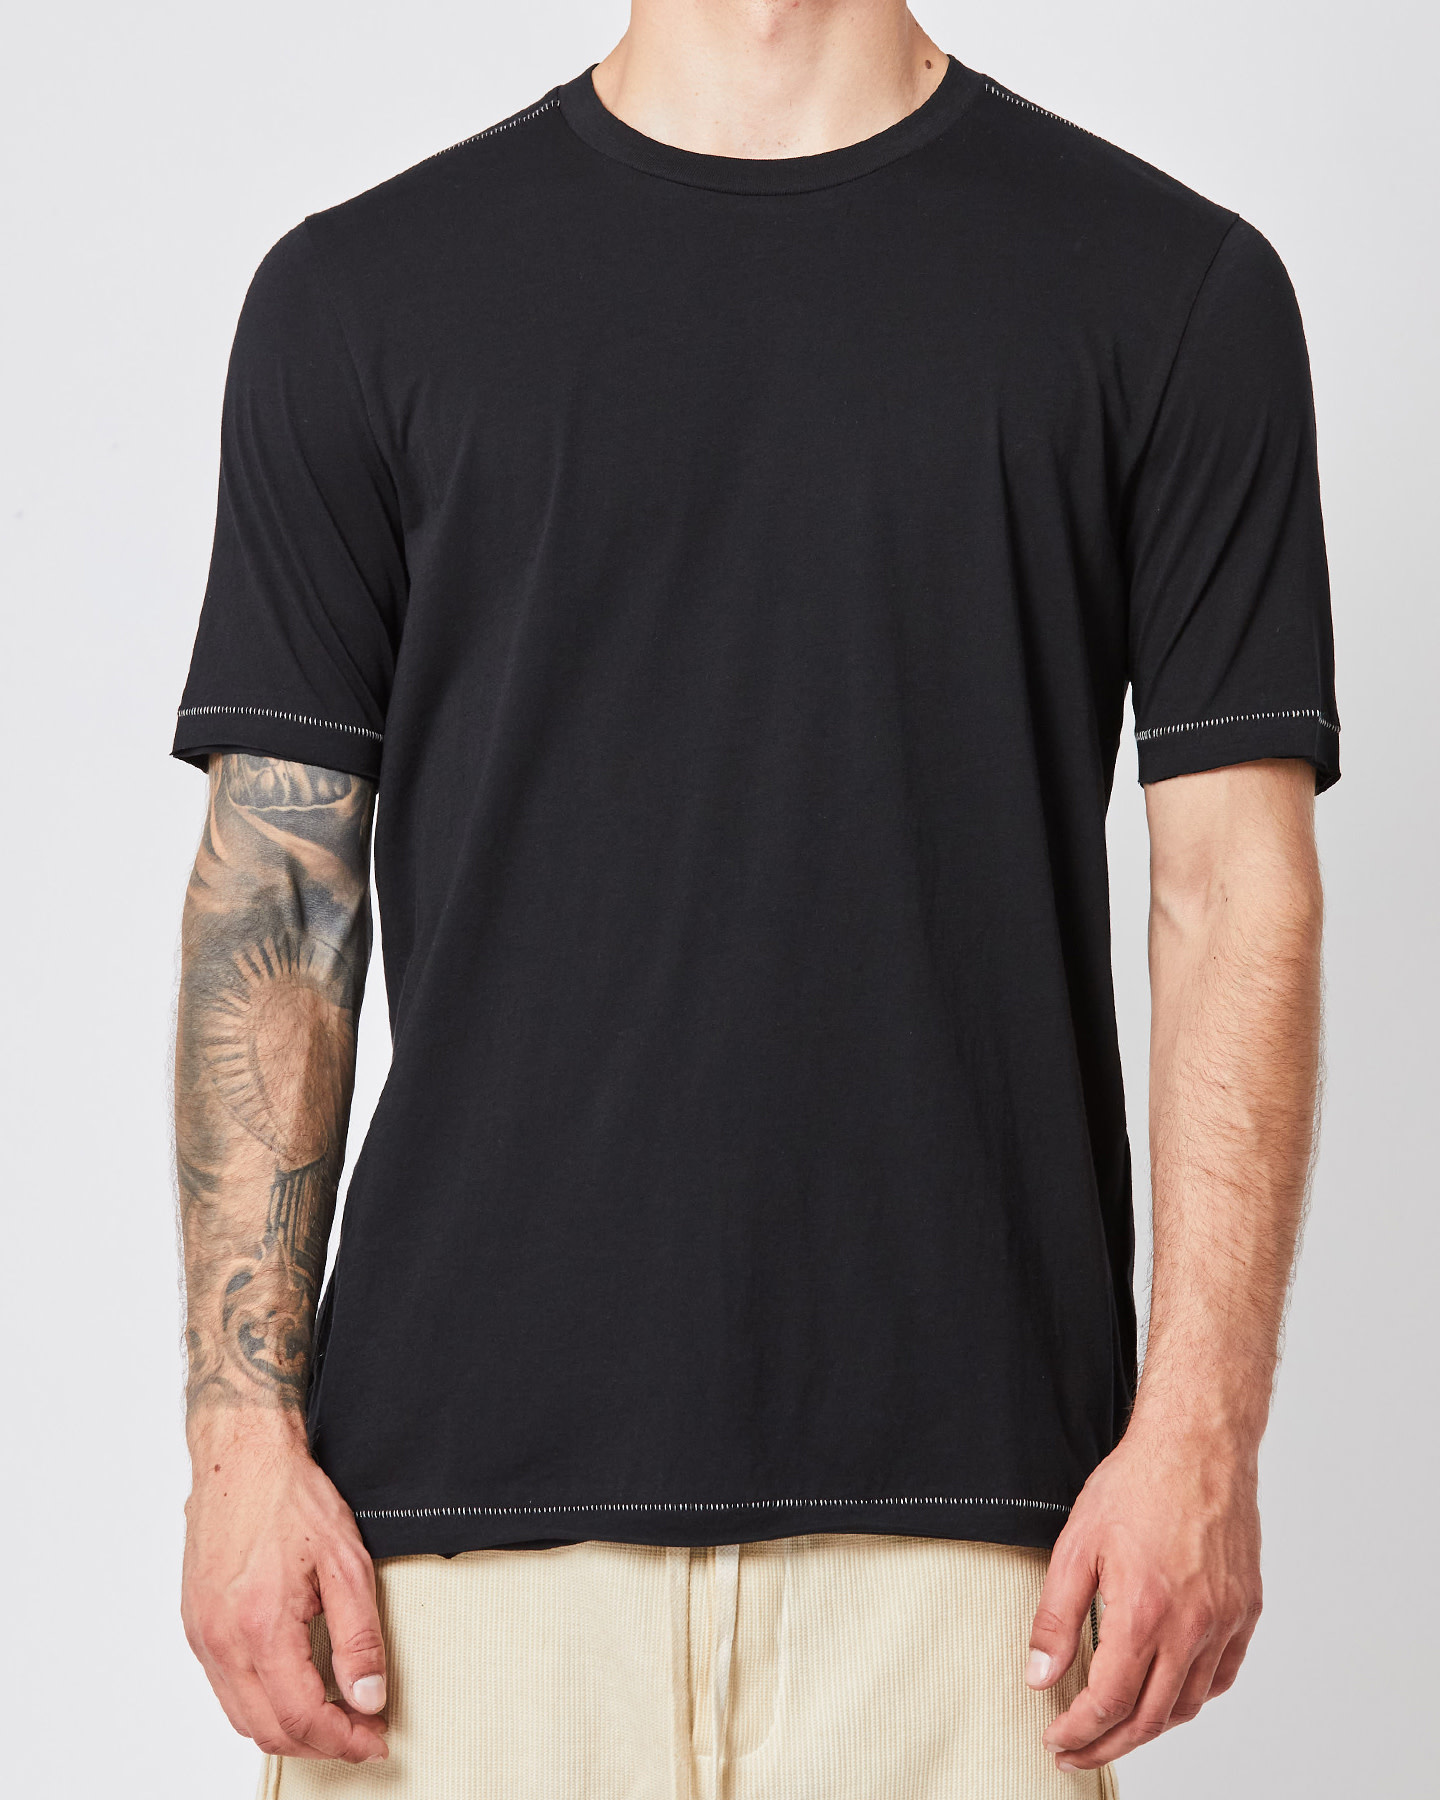 CONTRAST STITCH FITTED COTTON T-SHIRT - BLACK